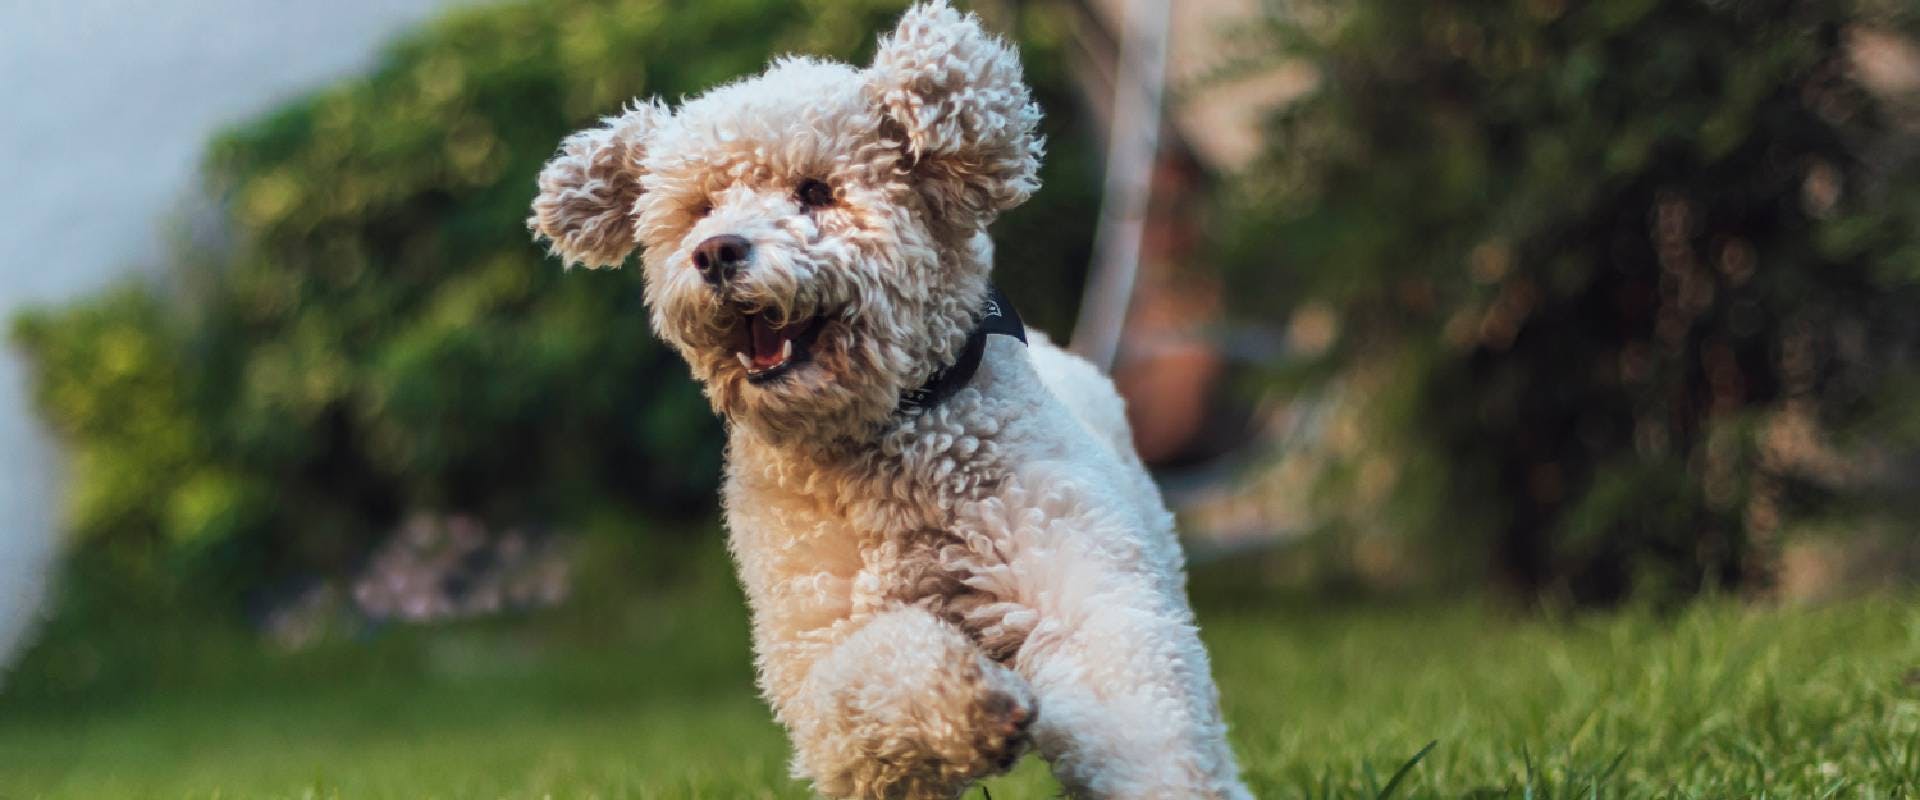 Miniature Poodle running